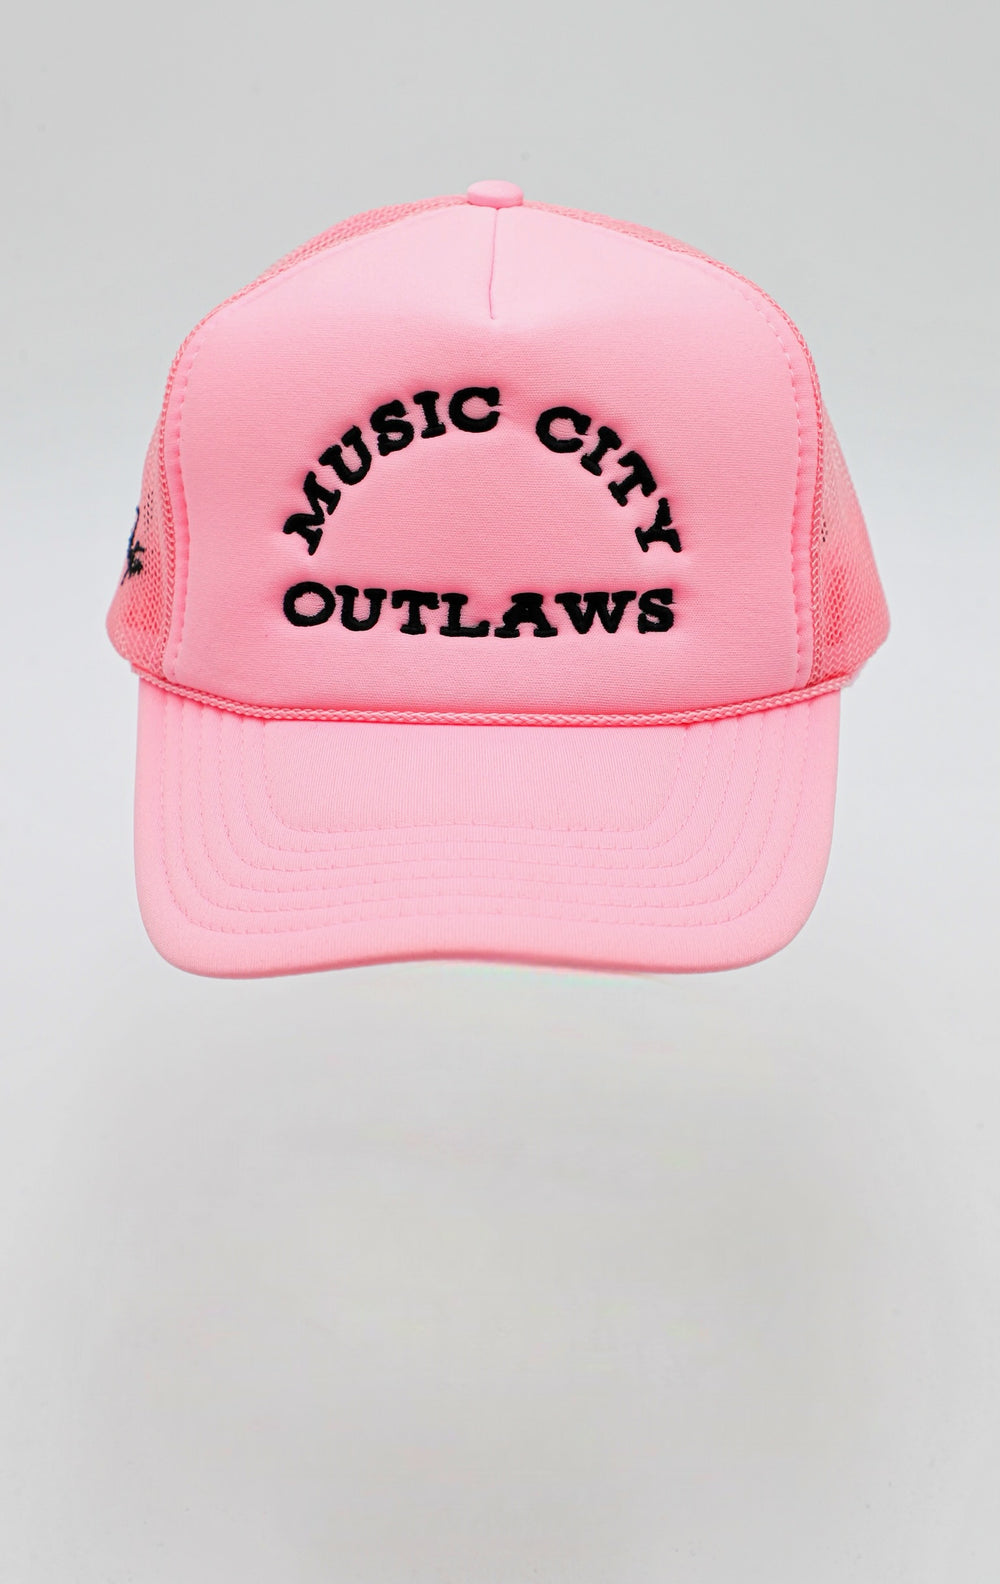 Music City Outlaw - Pink